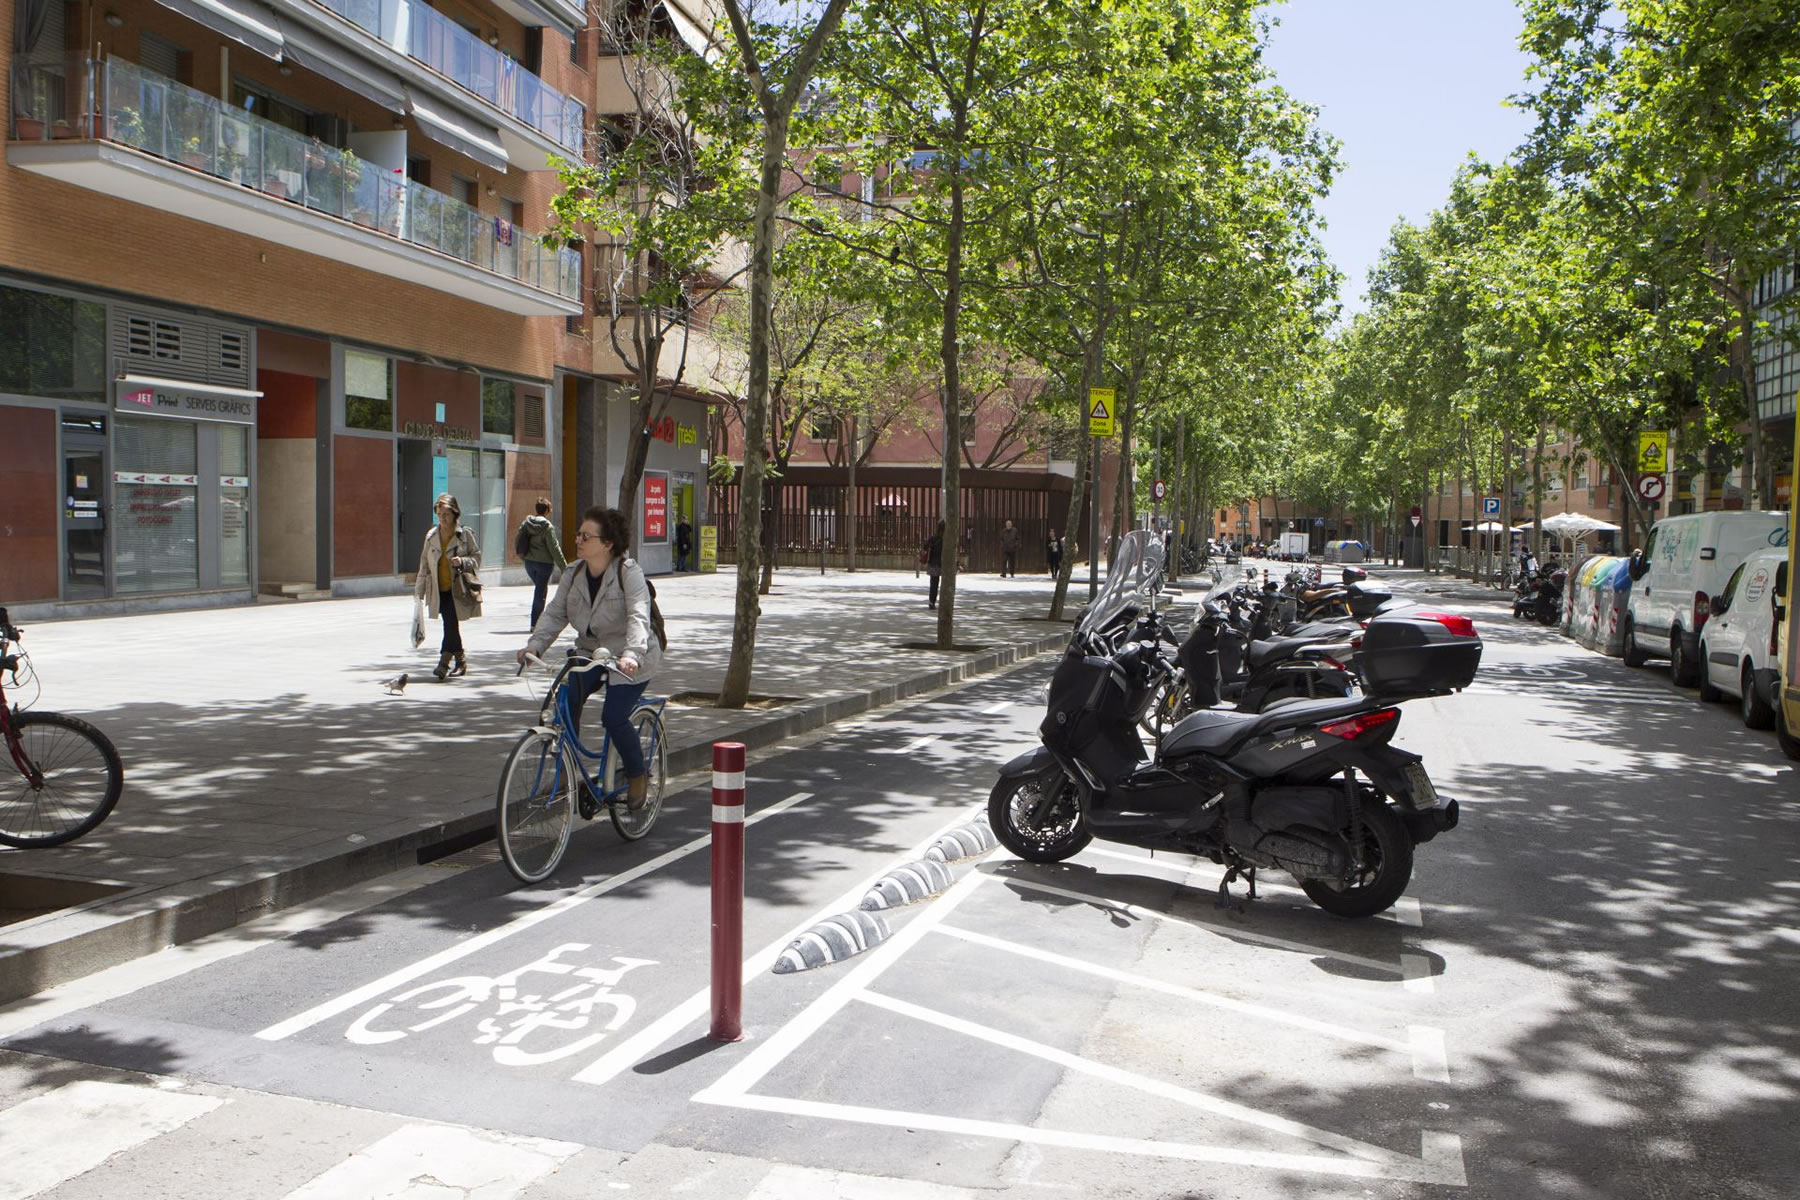 A woman on bicycle in a bicycle lane parallel to a motorcycle parking zone off the pavement